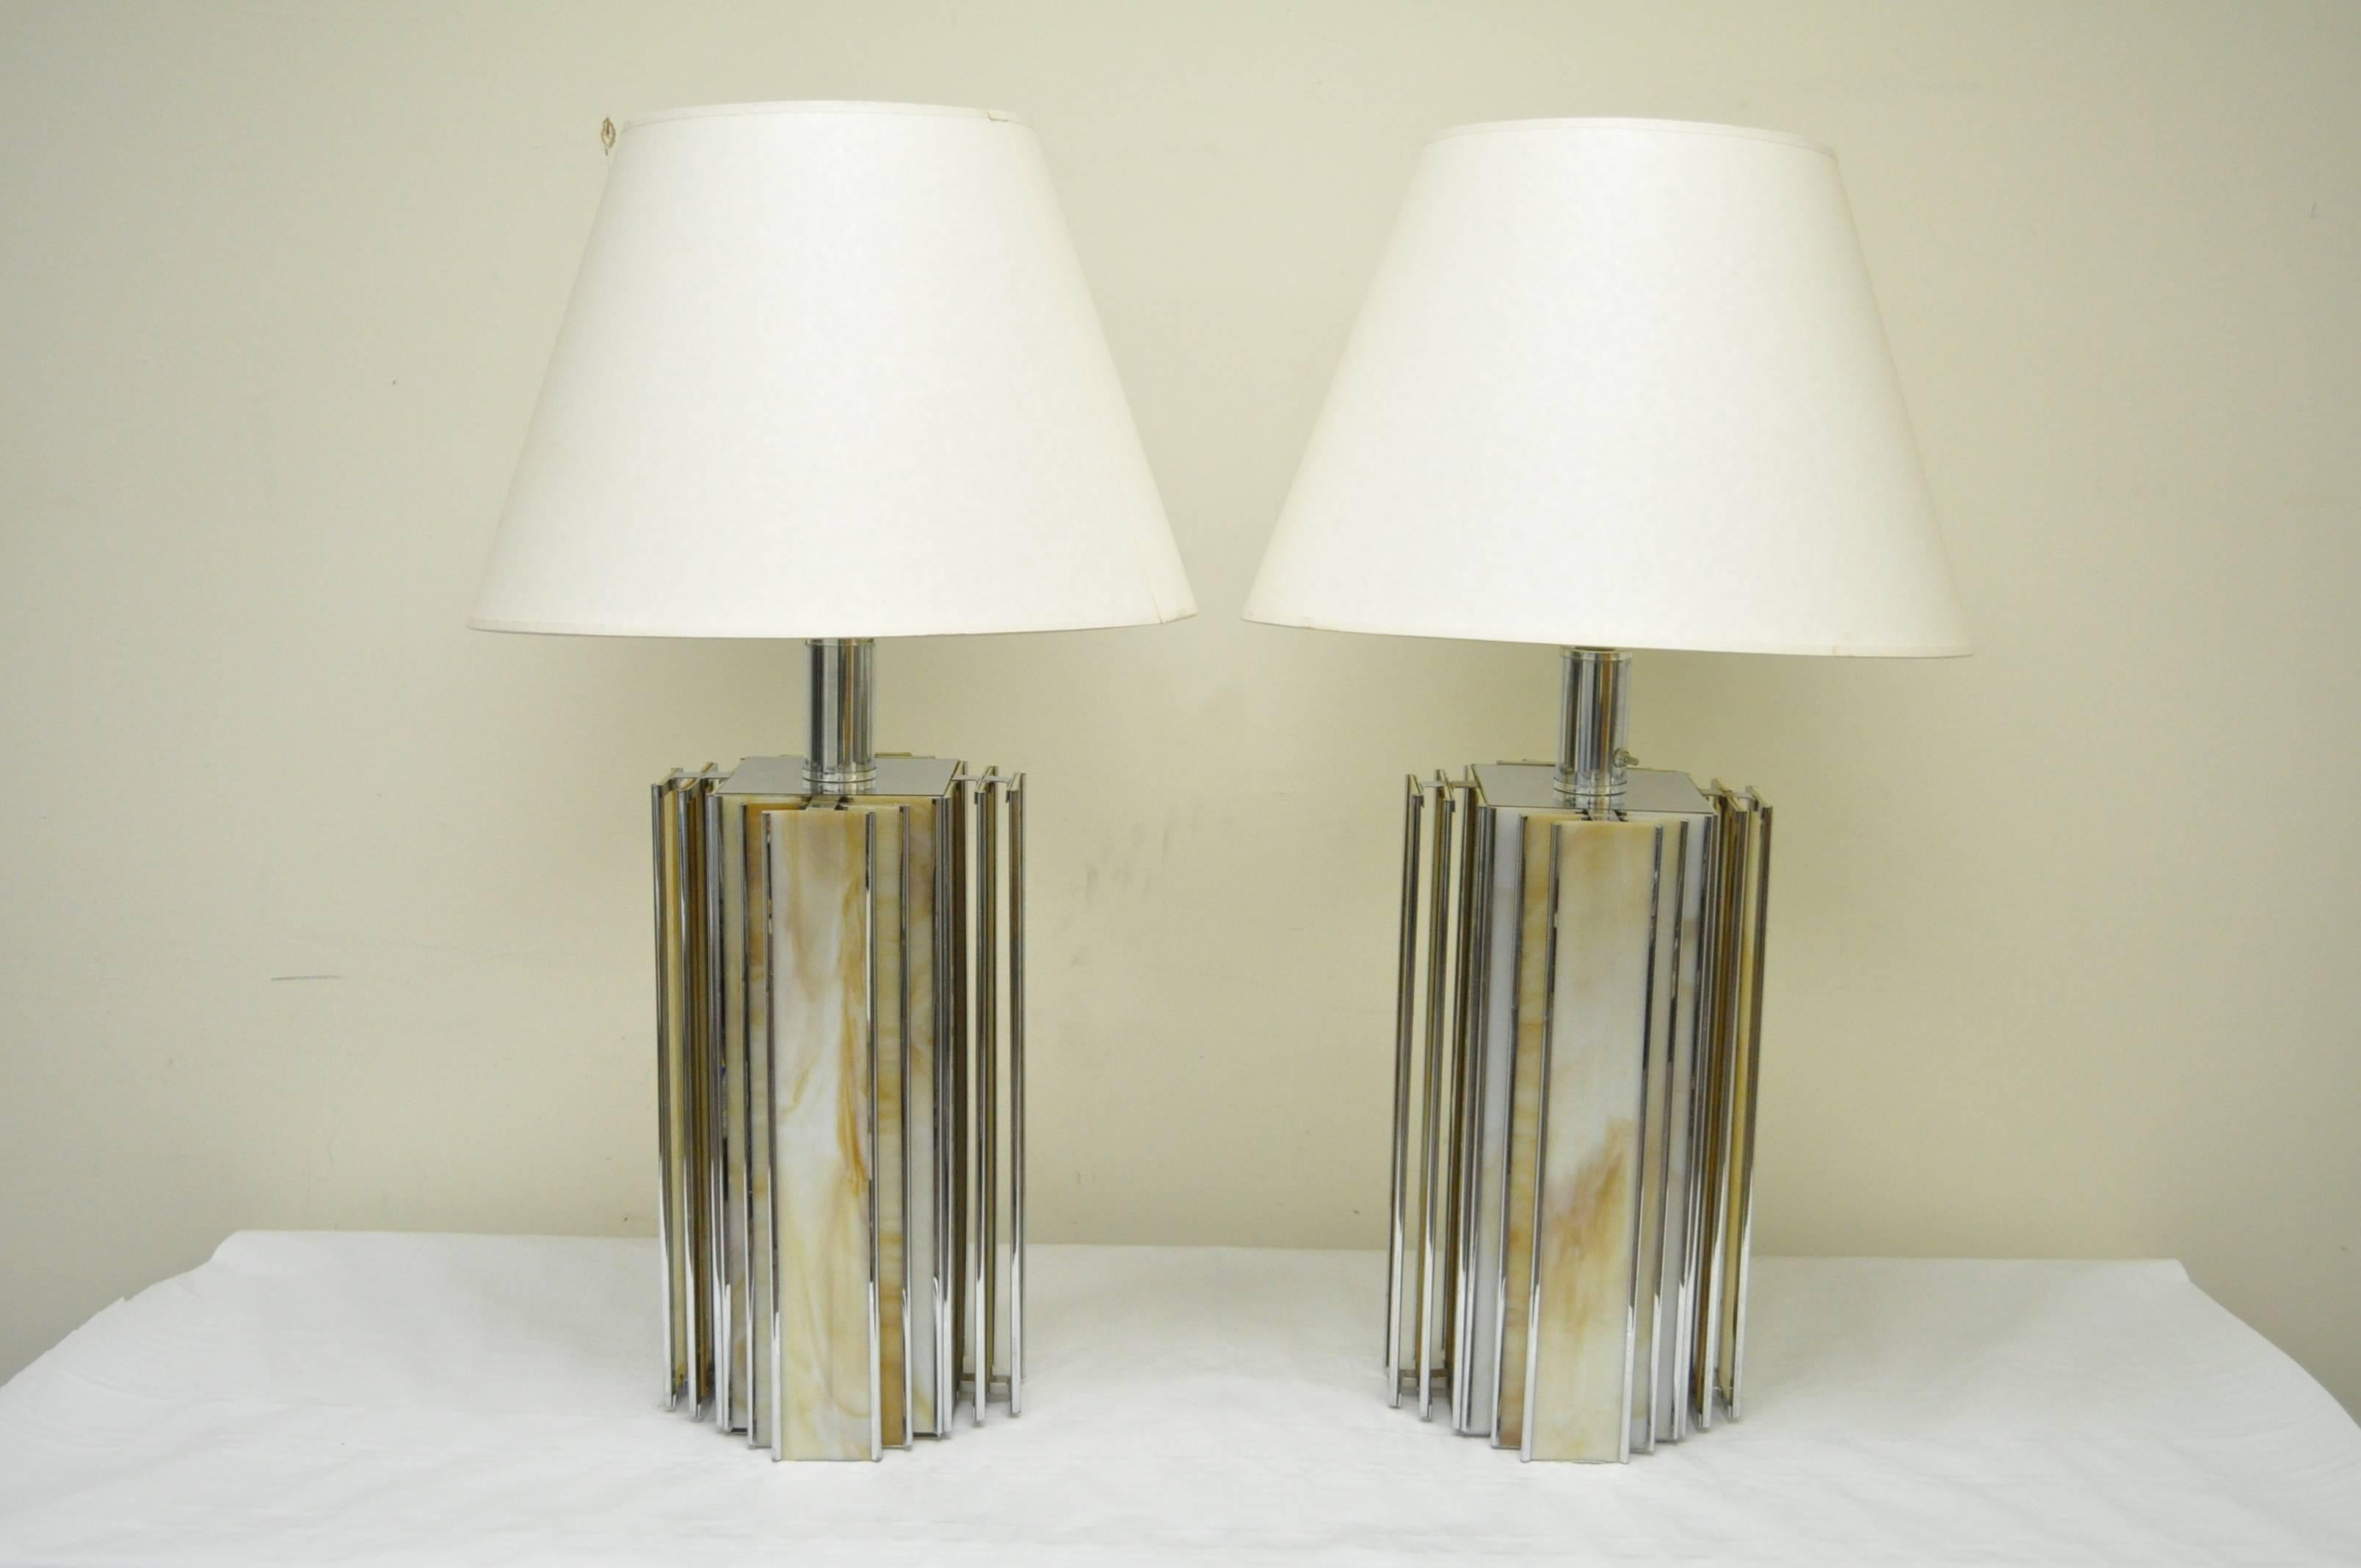 Pair of Mid-Century Modern Chrome and Slag Glass Table Lamps, Art Deco Style For Sale 1